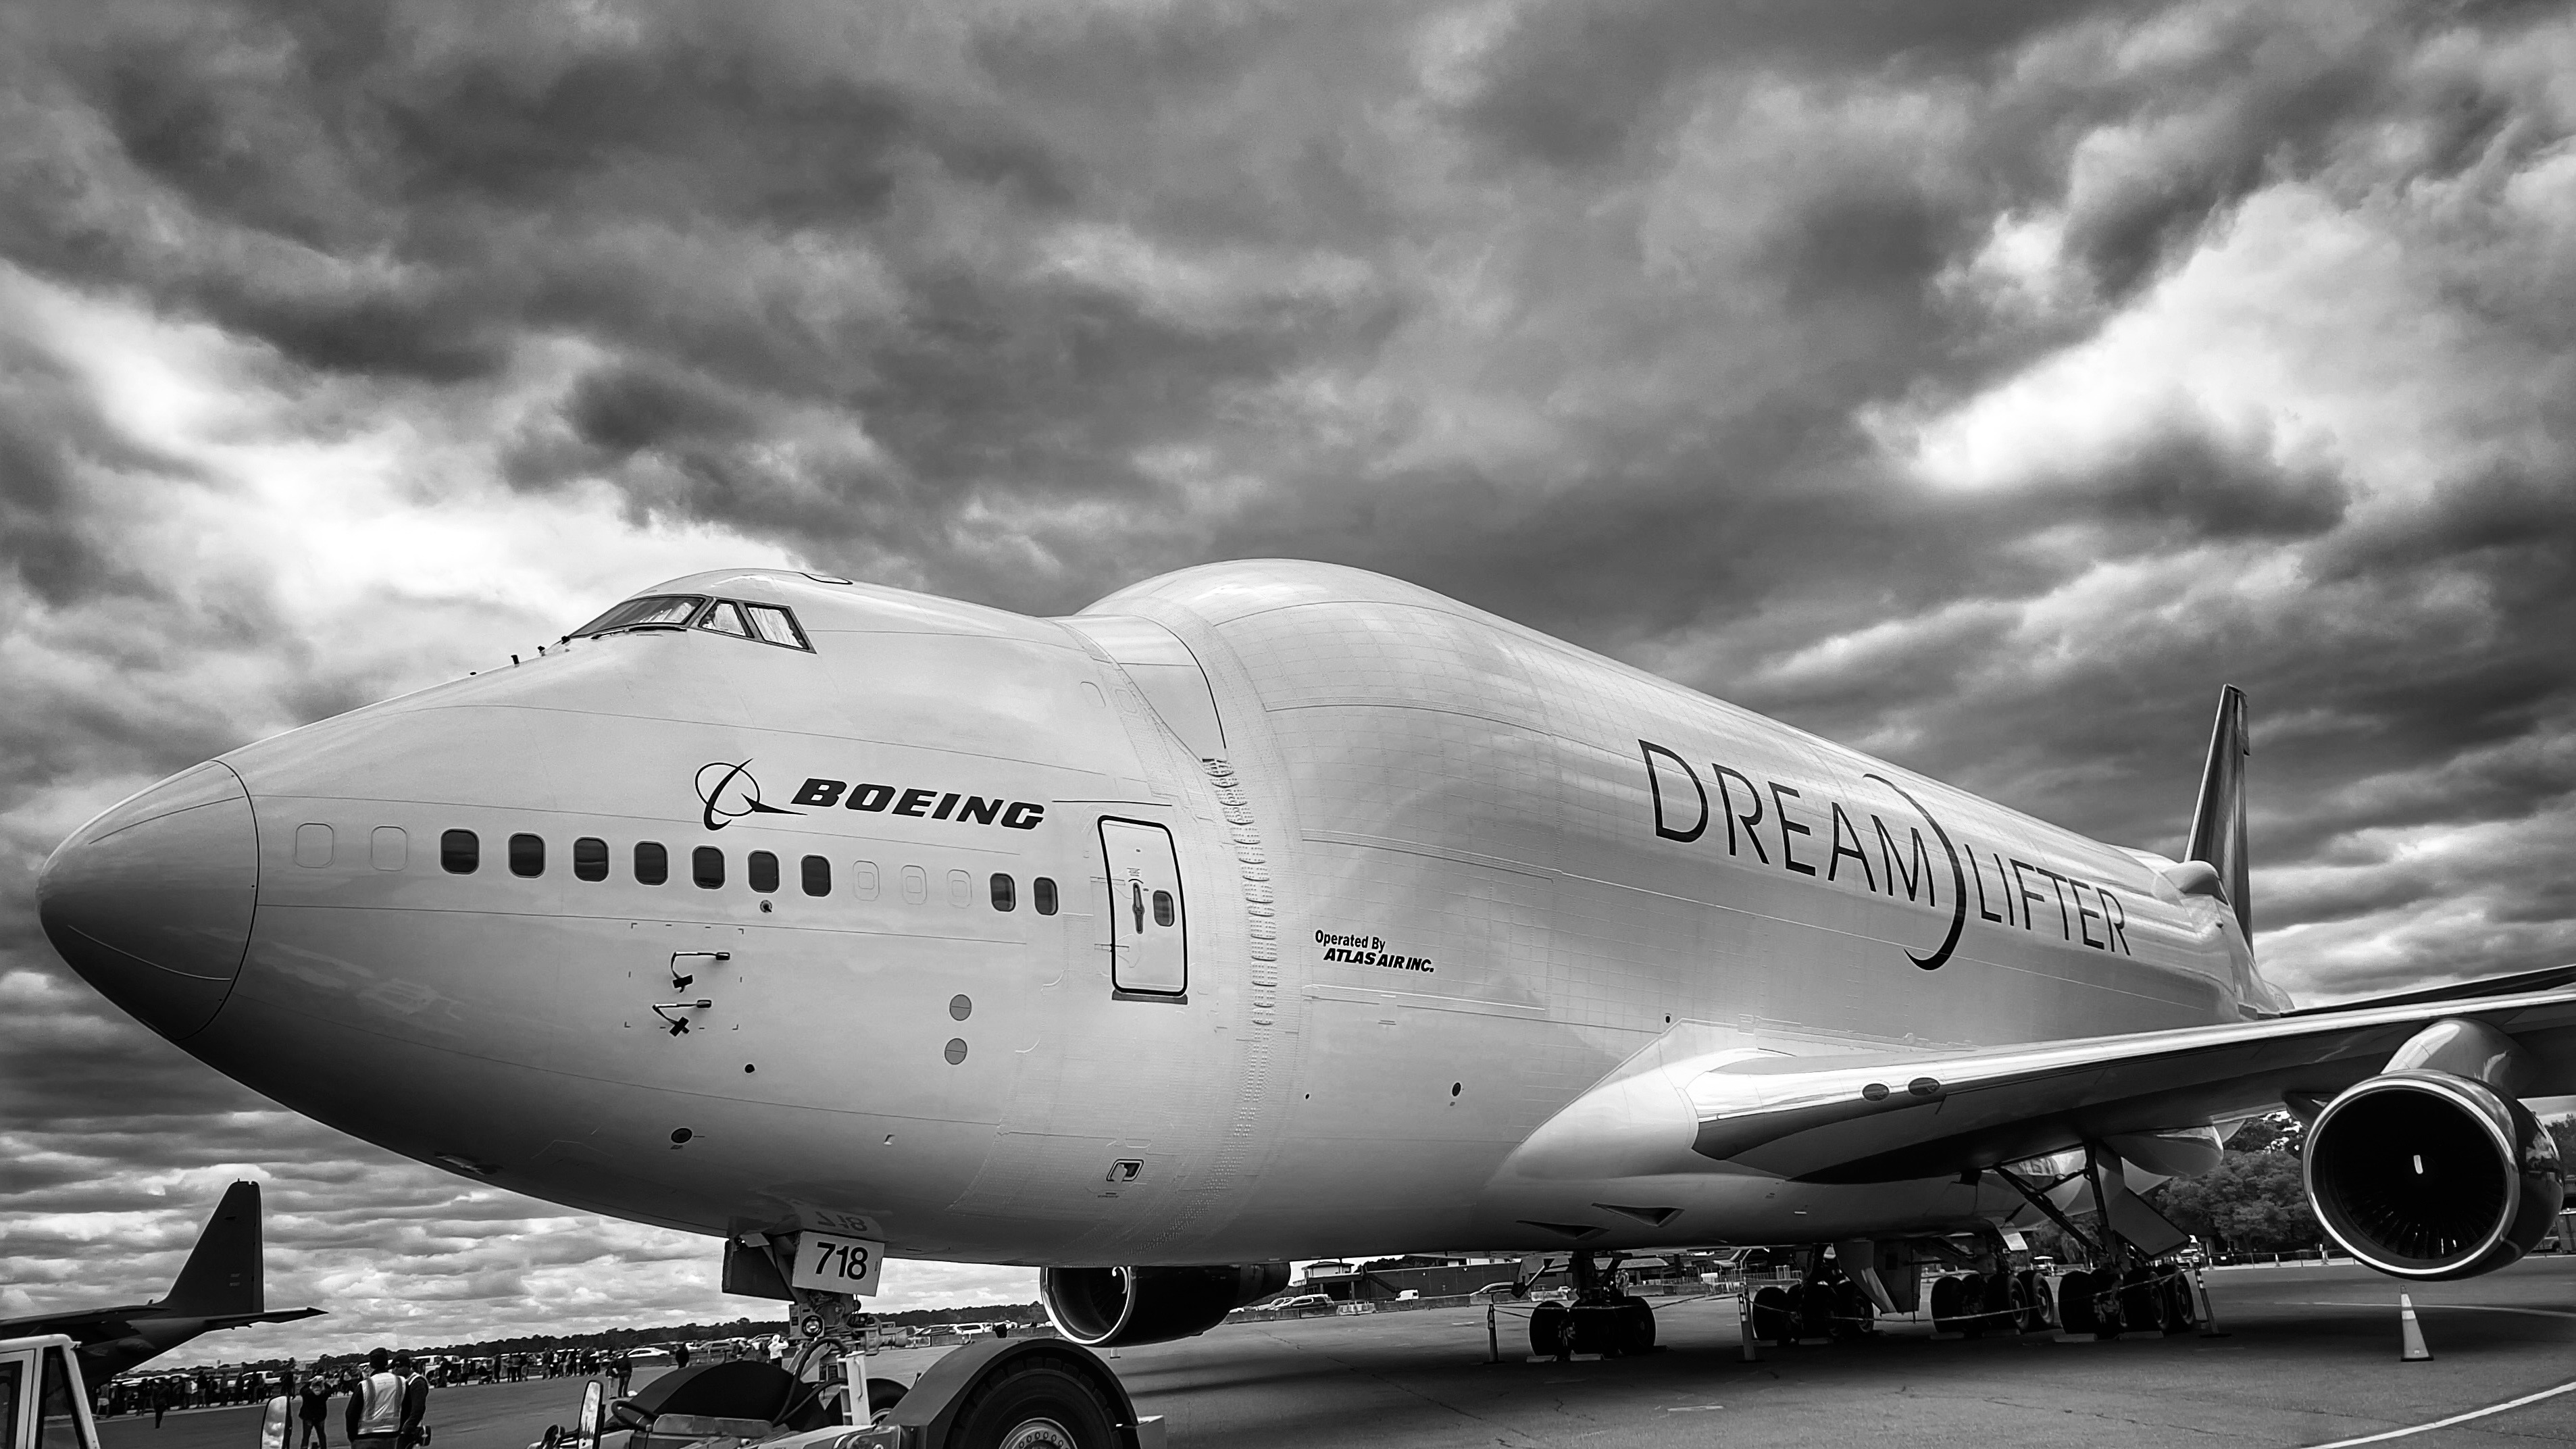 Black and white image of one of Boeing's Dreamlifters, a modified 747 aircraft used for transporting parts for Boeing's 787 assembly facilities in Charleston, South Carolina and Seattle, Washington. The white plane is set against dark storm clouds.